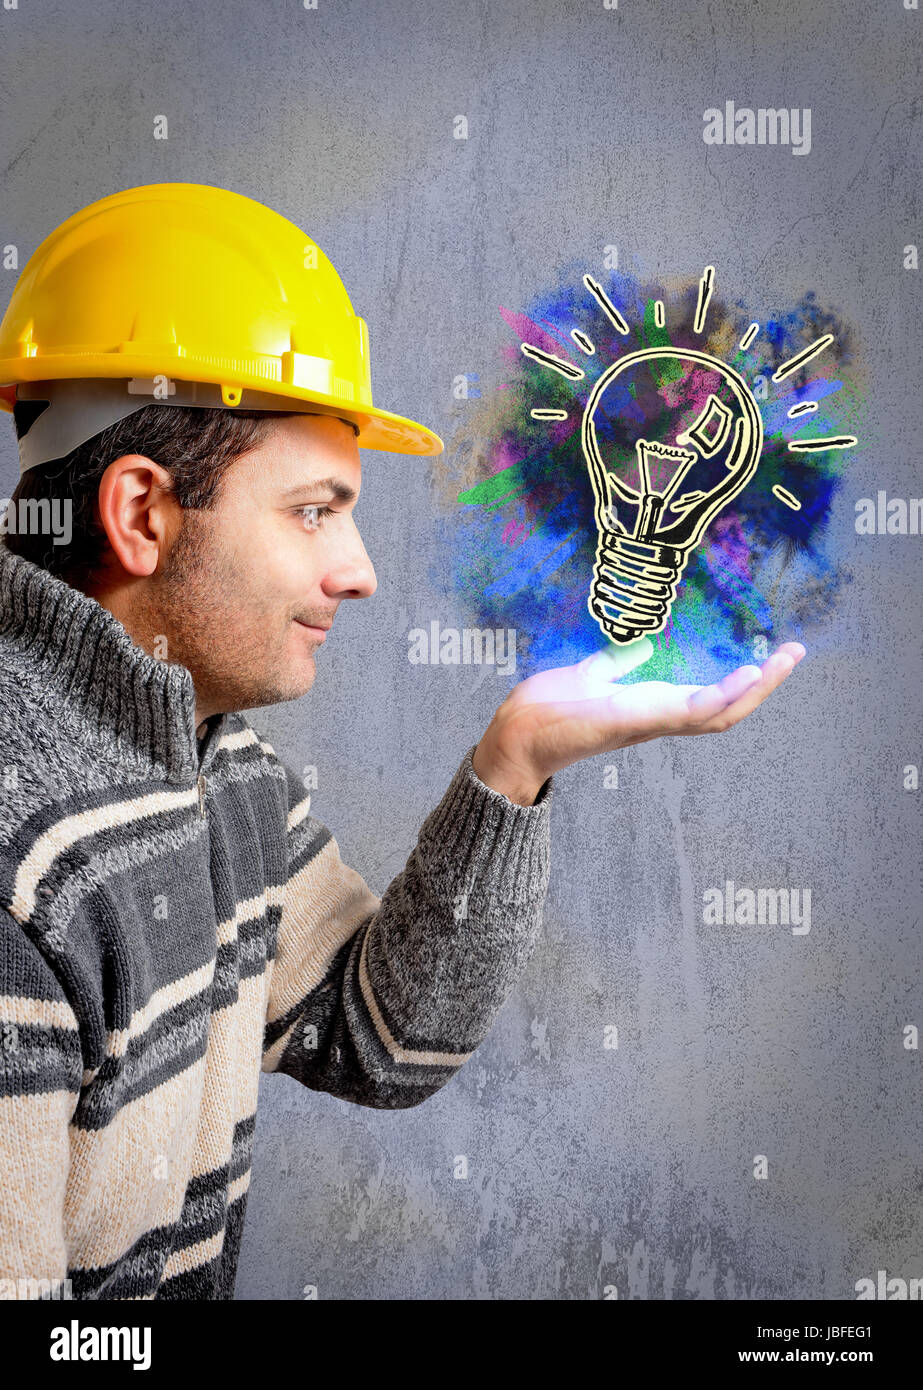 engineer with a helmet on his head, looking a building project that grows on his hand Stock Photo